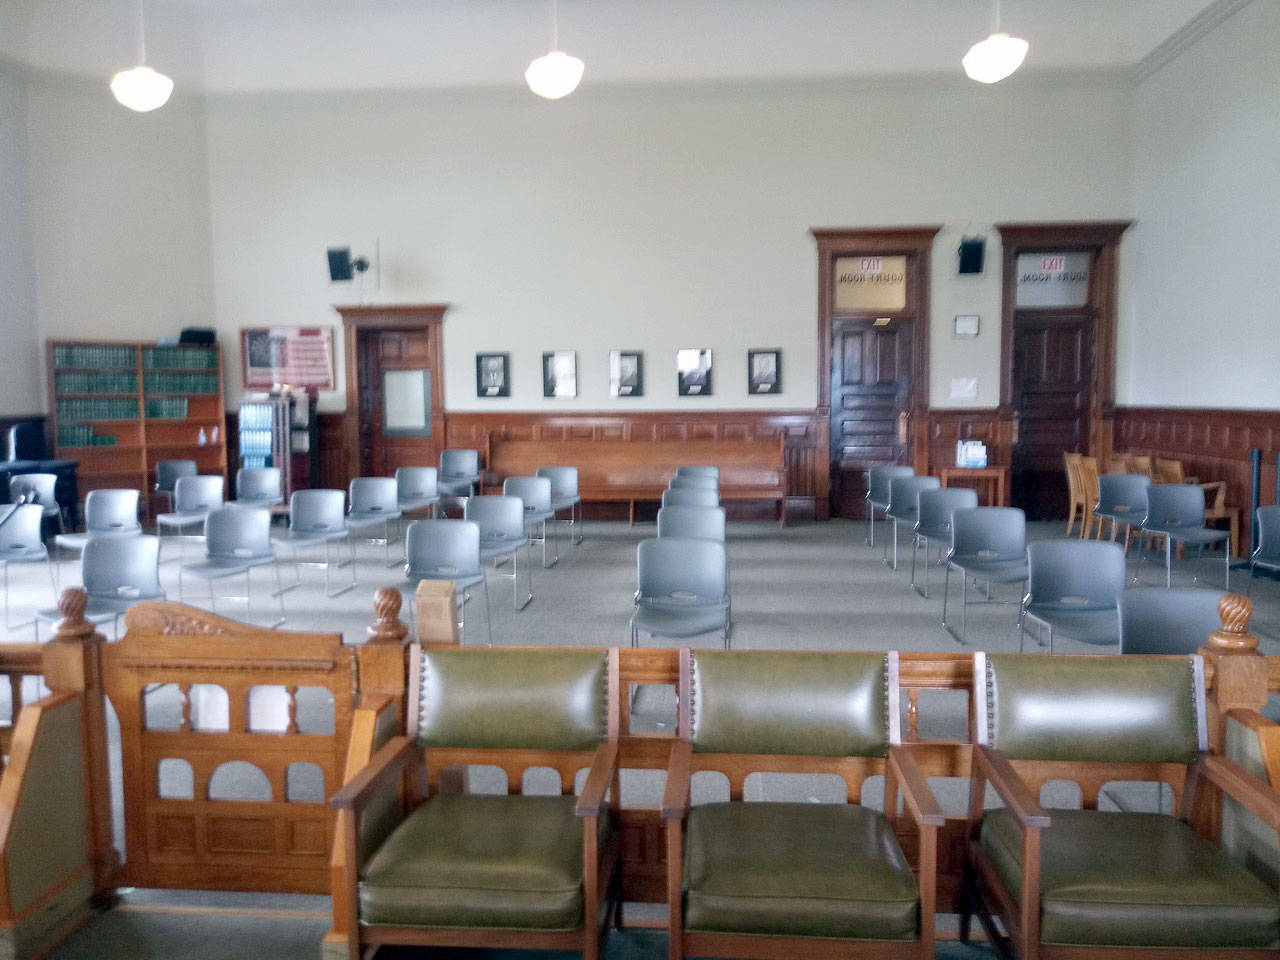 Seating in Jefferson County courtrooms has been changed to maintain social distancing.